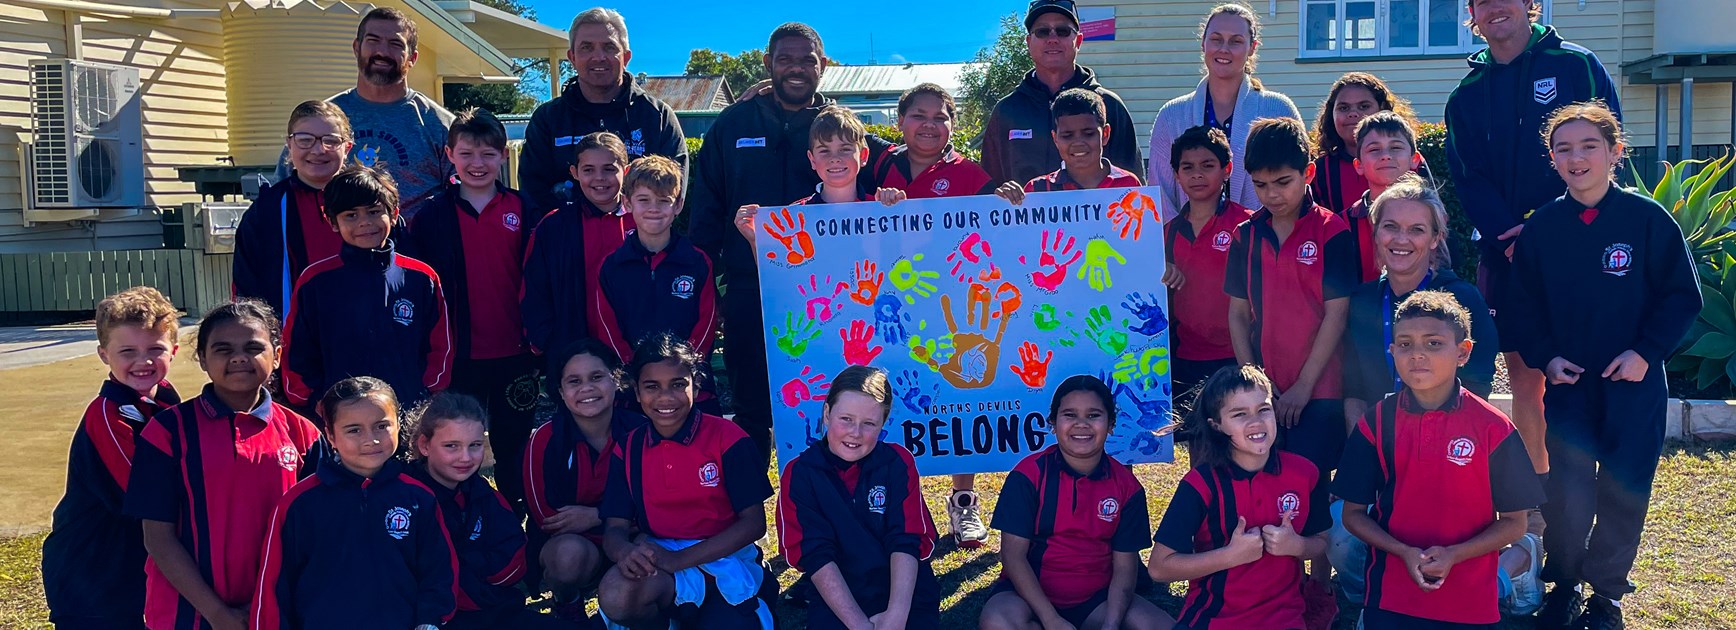 Devils use rugby league as a vehicle for positive change